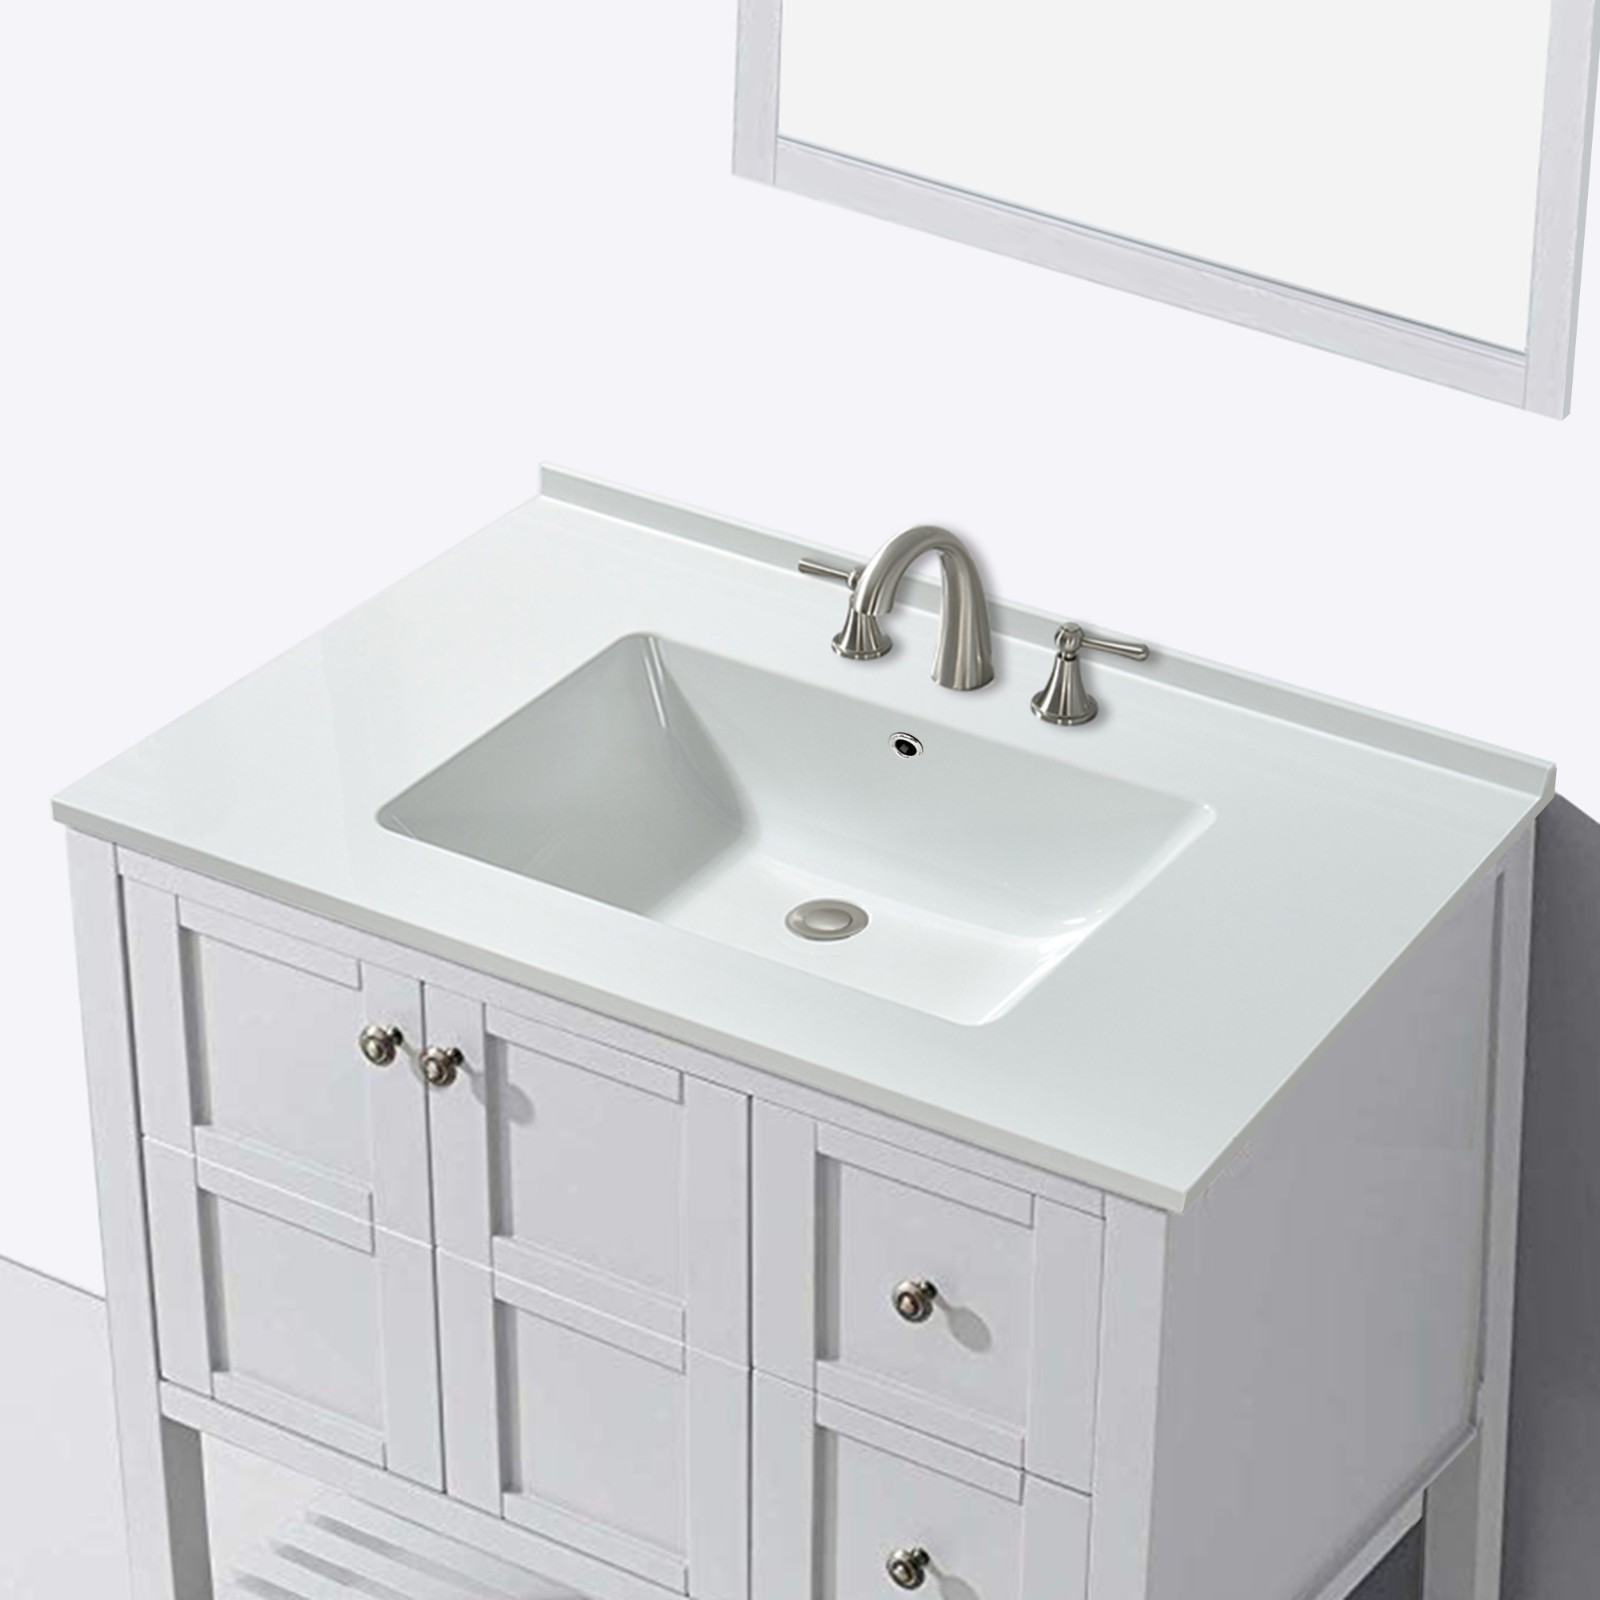  WOODBRIDGE VT3722-1008 Solid Surface Vanity Top with with Intergrated Sink and 3 Faucet Holes for 8 inch Widespread Faucet, 37